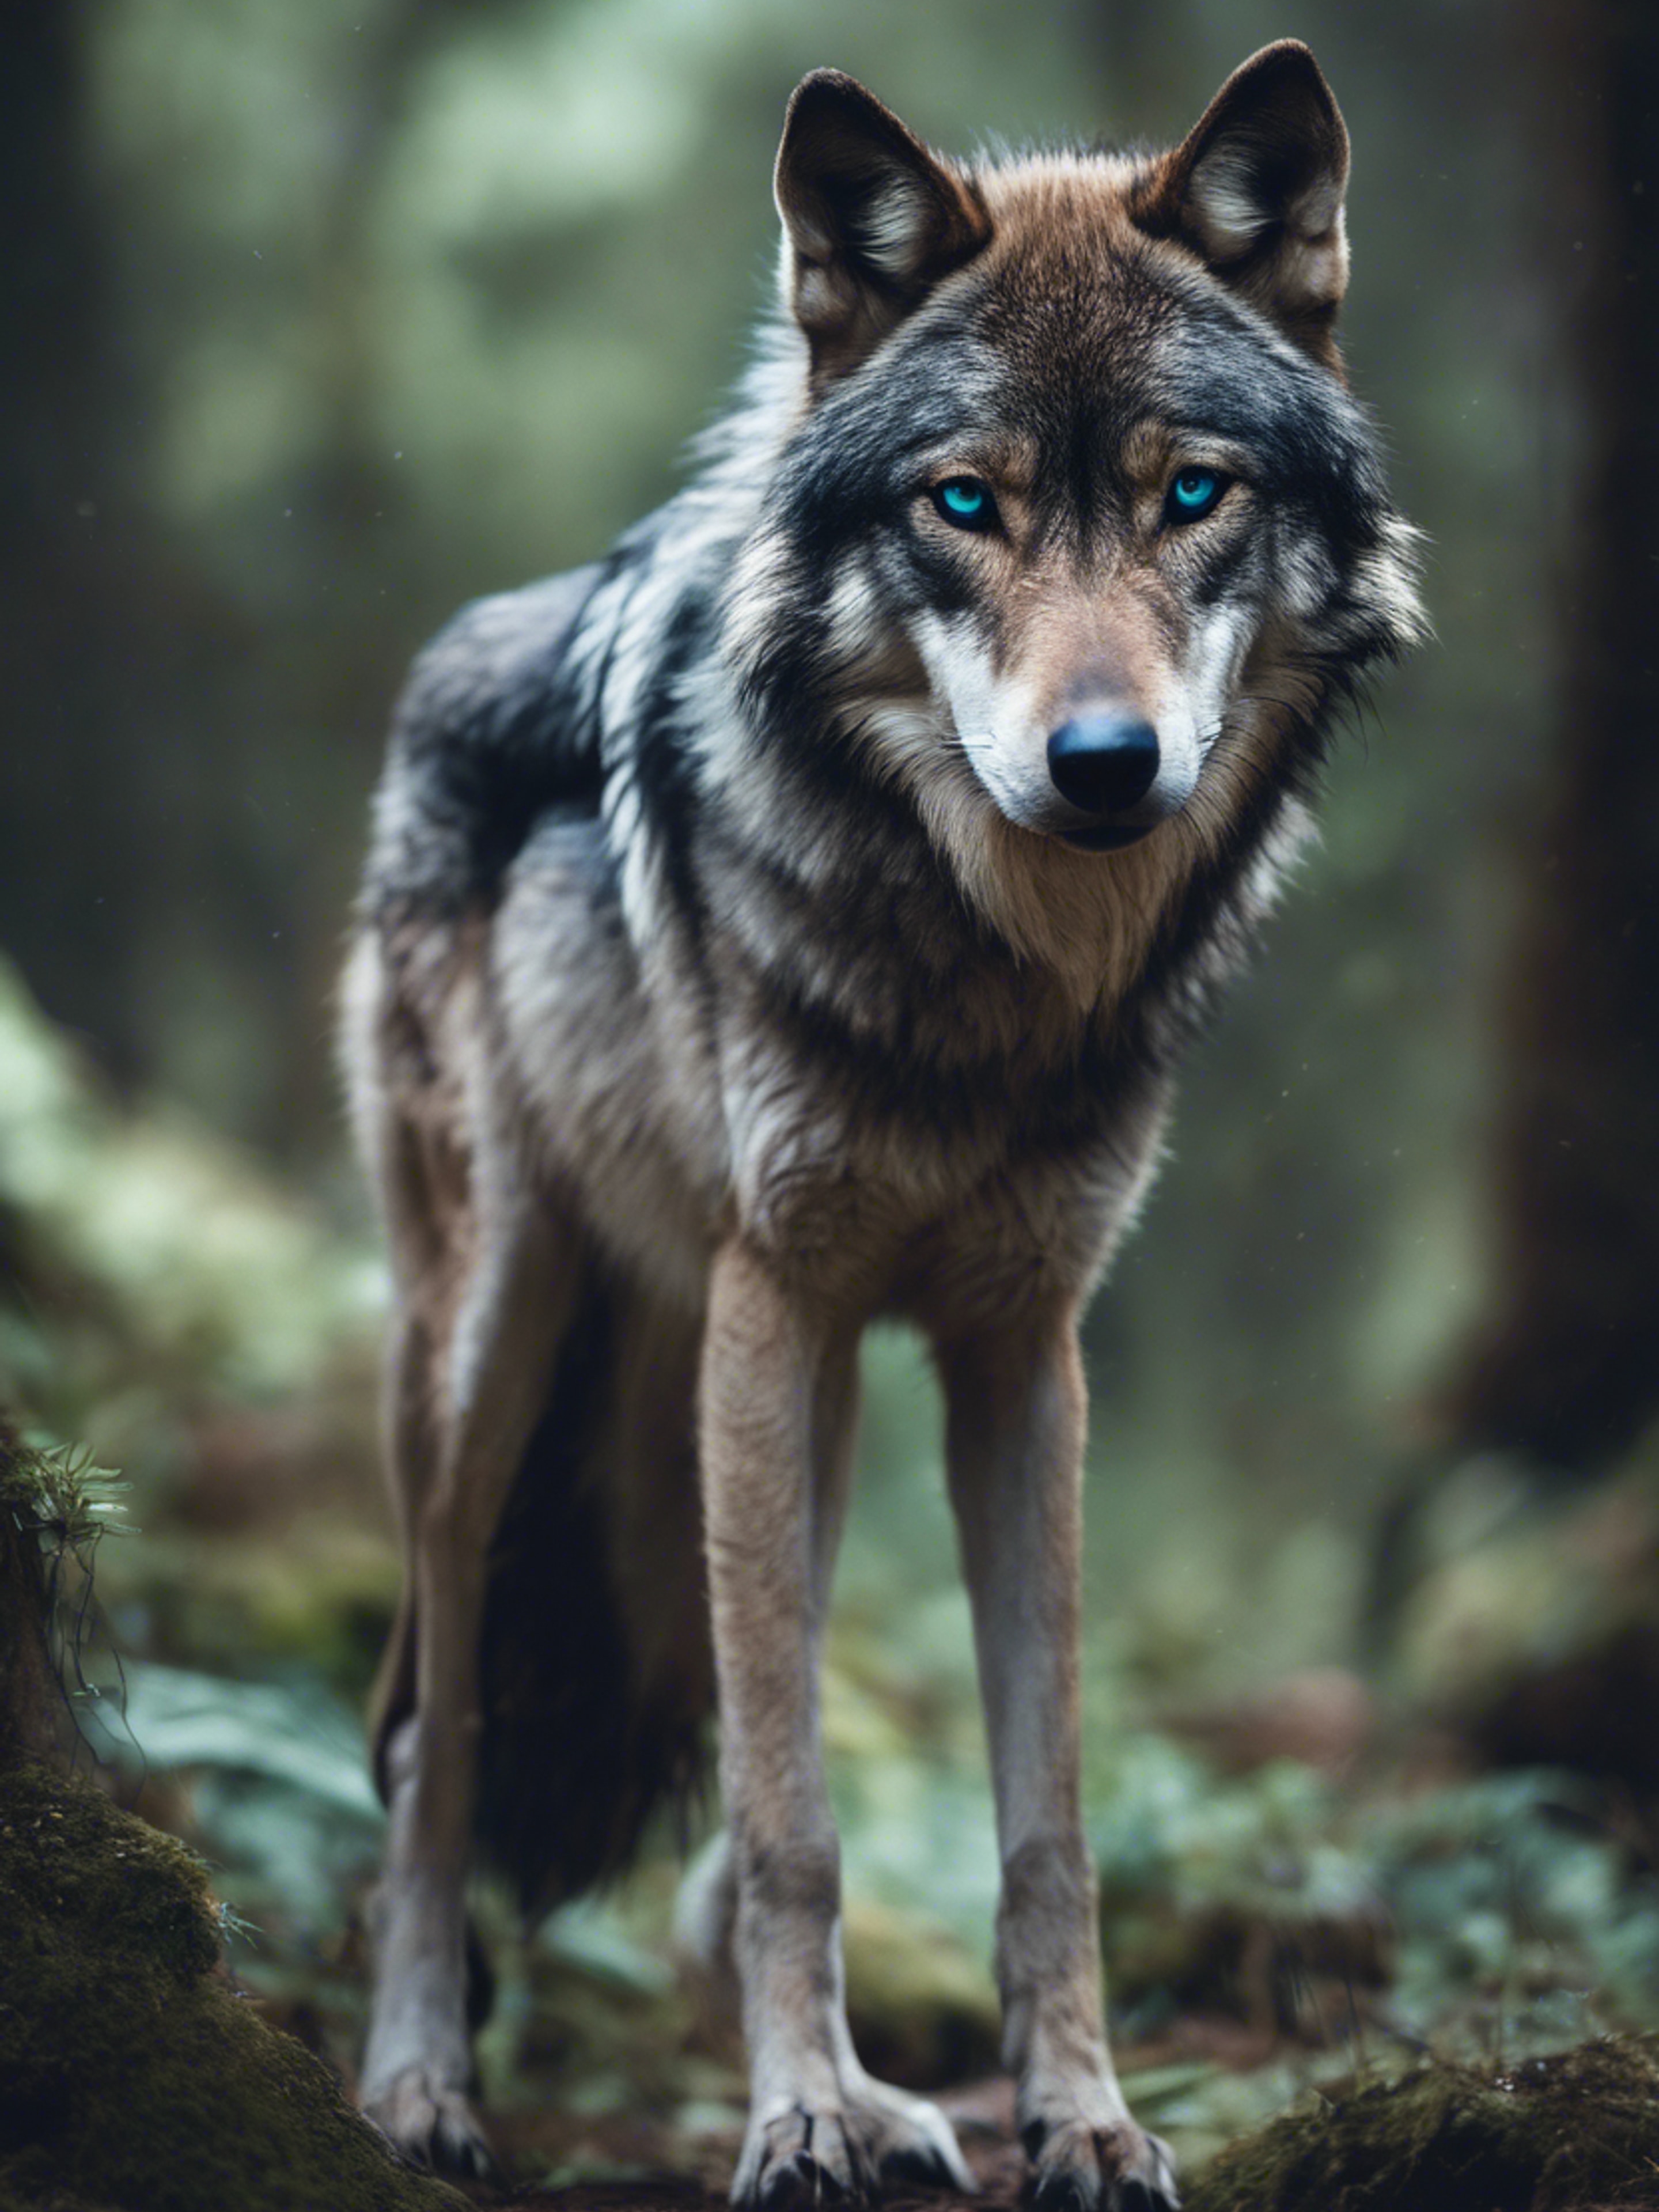 A lone Gothic wolf with teal eyes prowling through the darkness of an ancient forest. Wallpaper[a9217c08a86544208905]